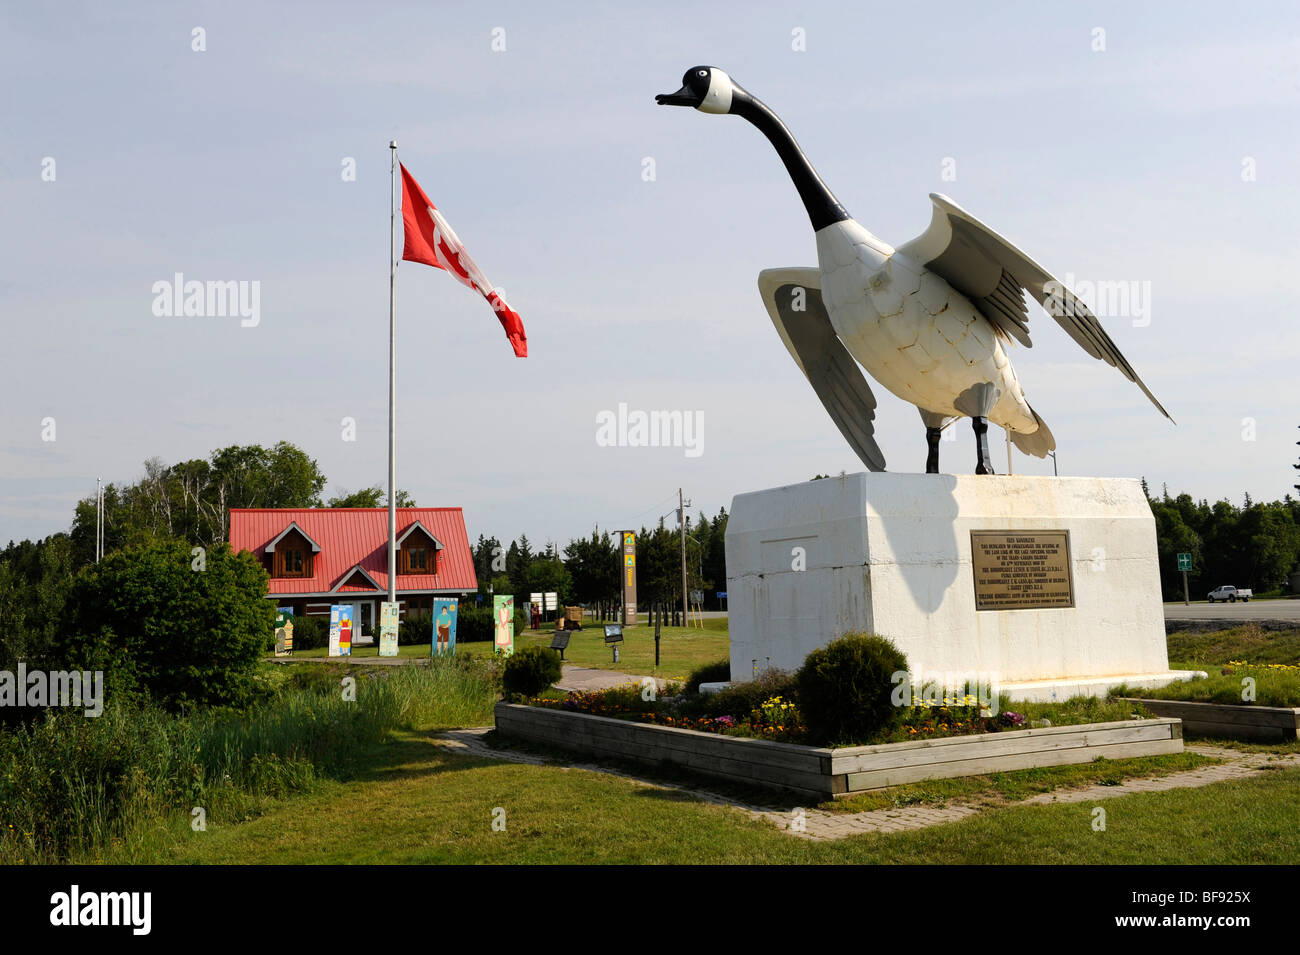 Wild Goose Statue in Wawa Ontario Canada Commemorates completion of Lake Superior stretch of Trans Canada Highway 17 Stock Photo